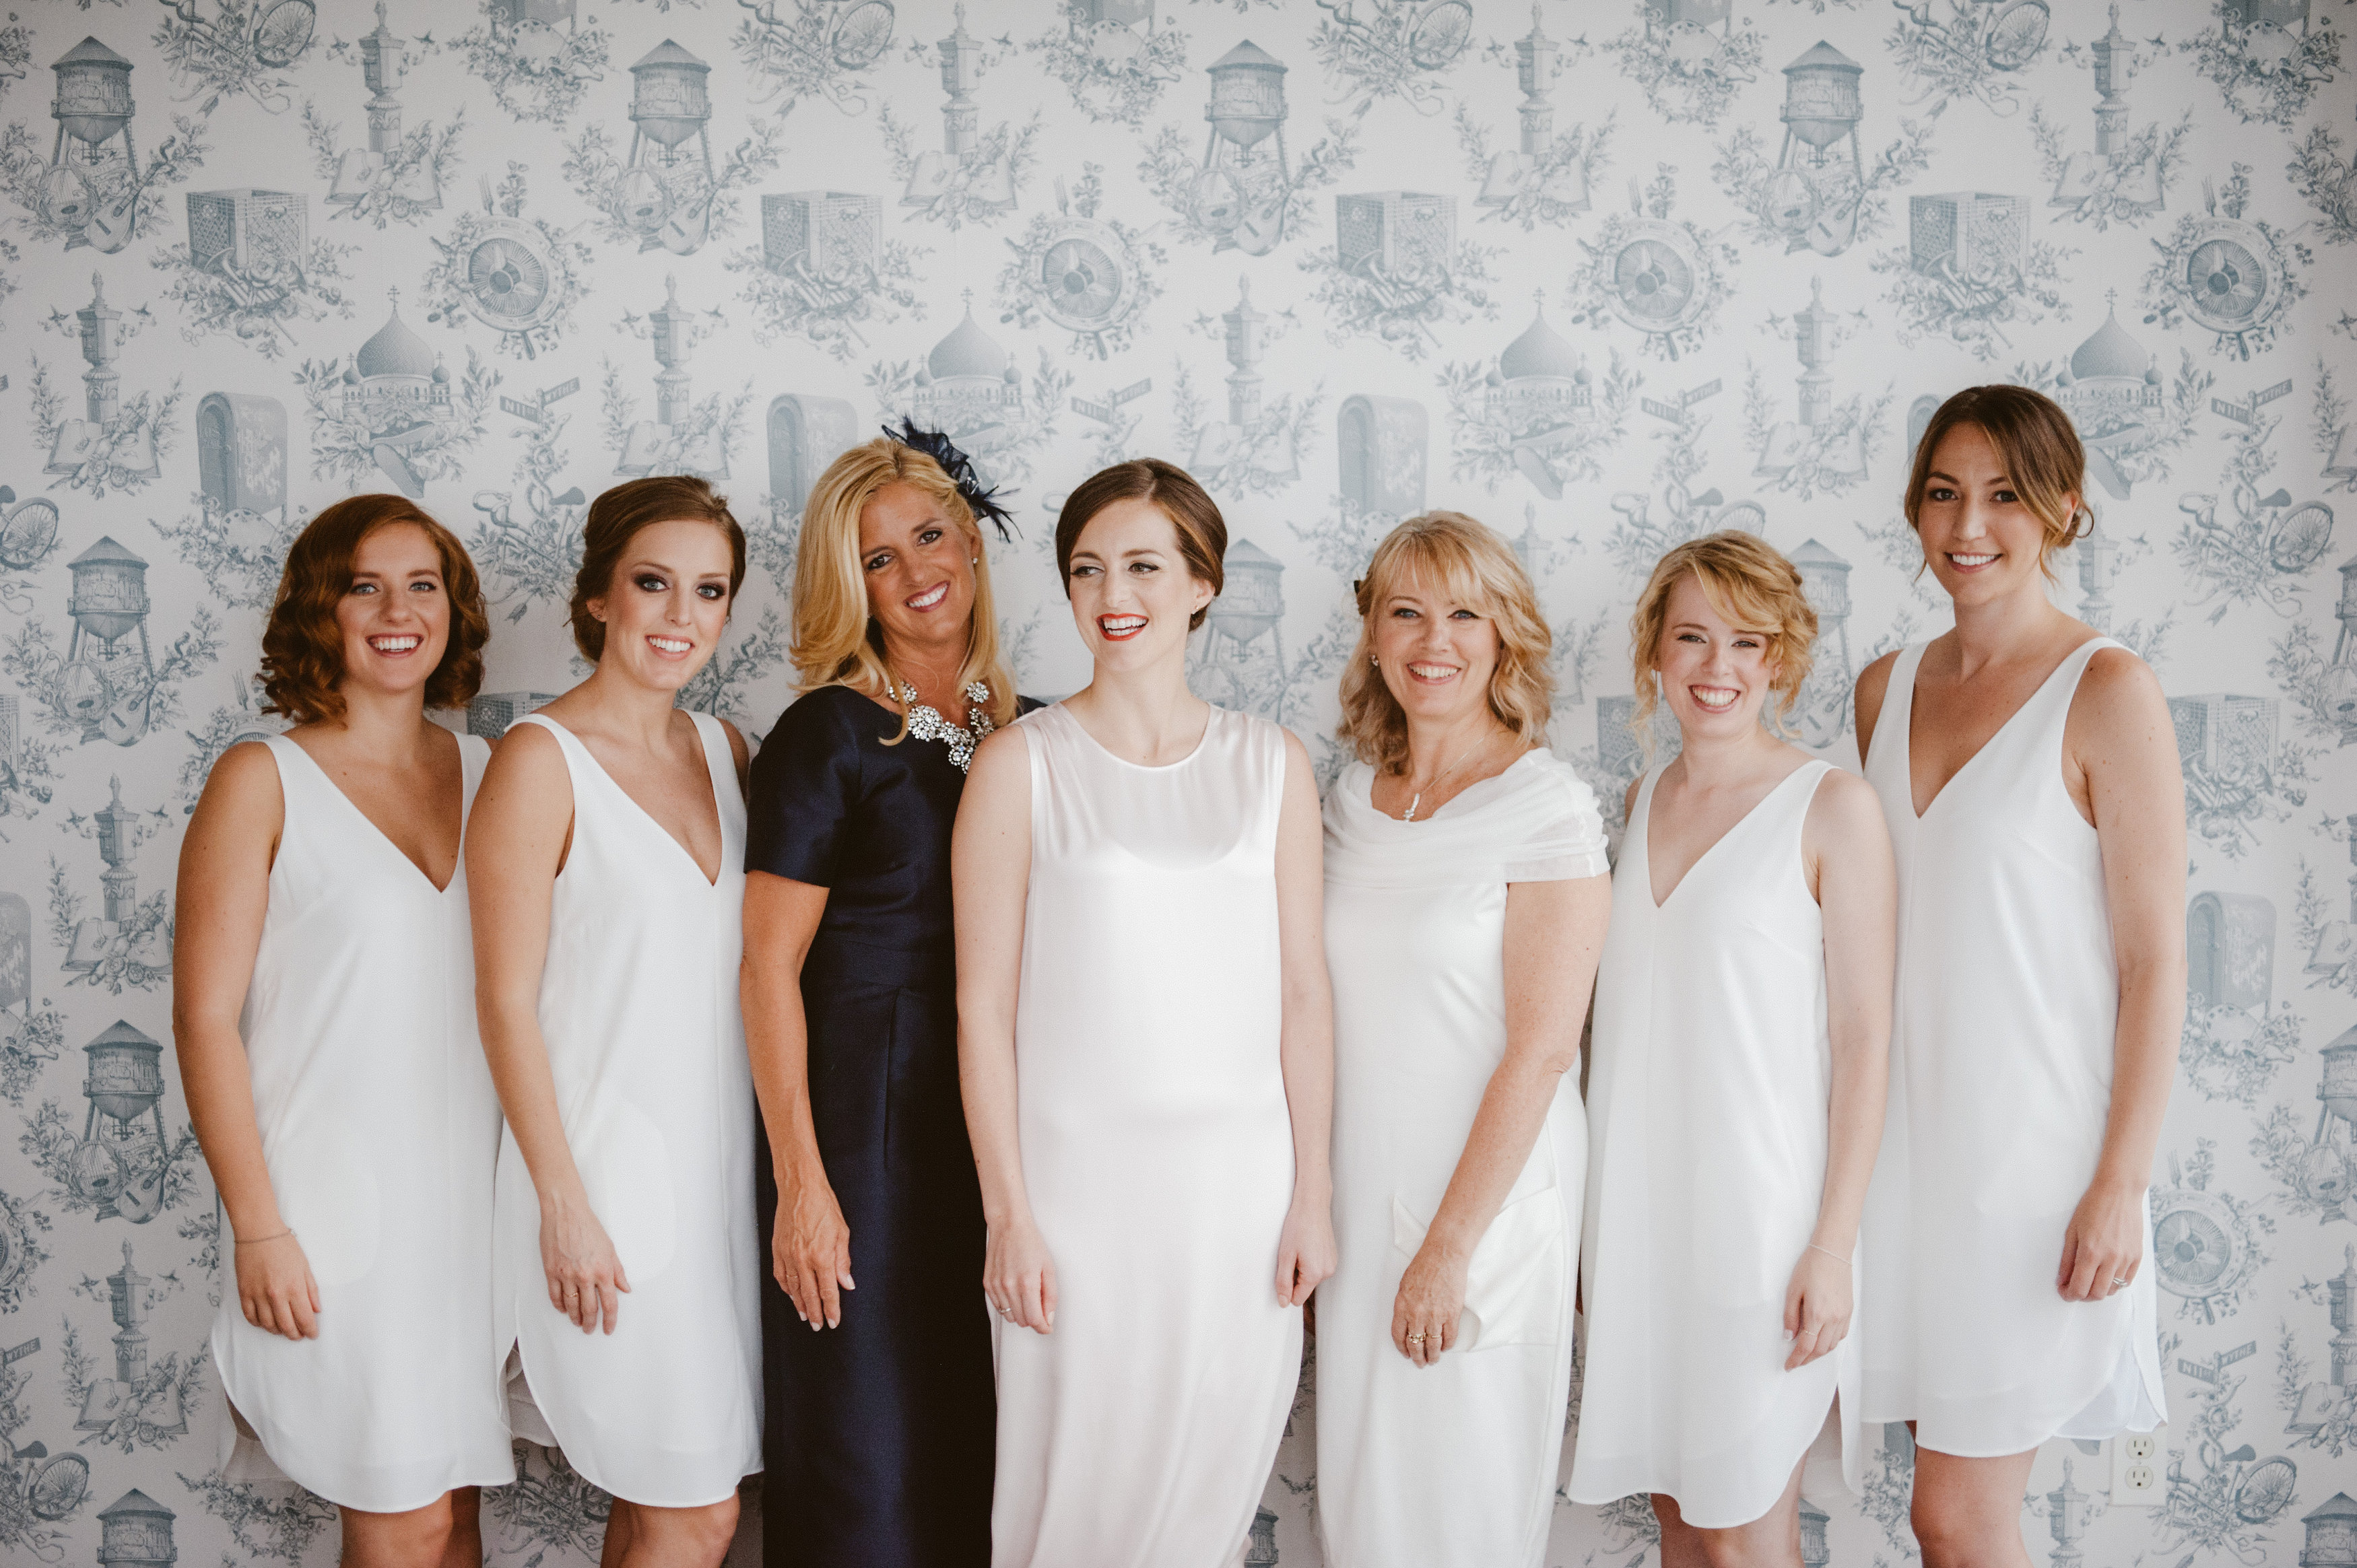 Makeup column: should my bridal party get their makeup done? | SB Beauty